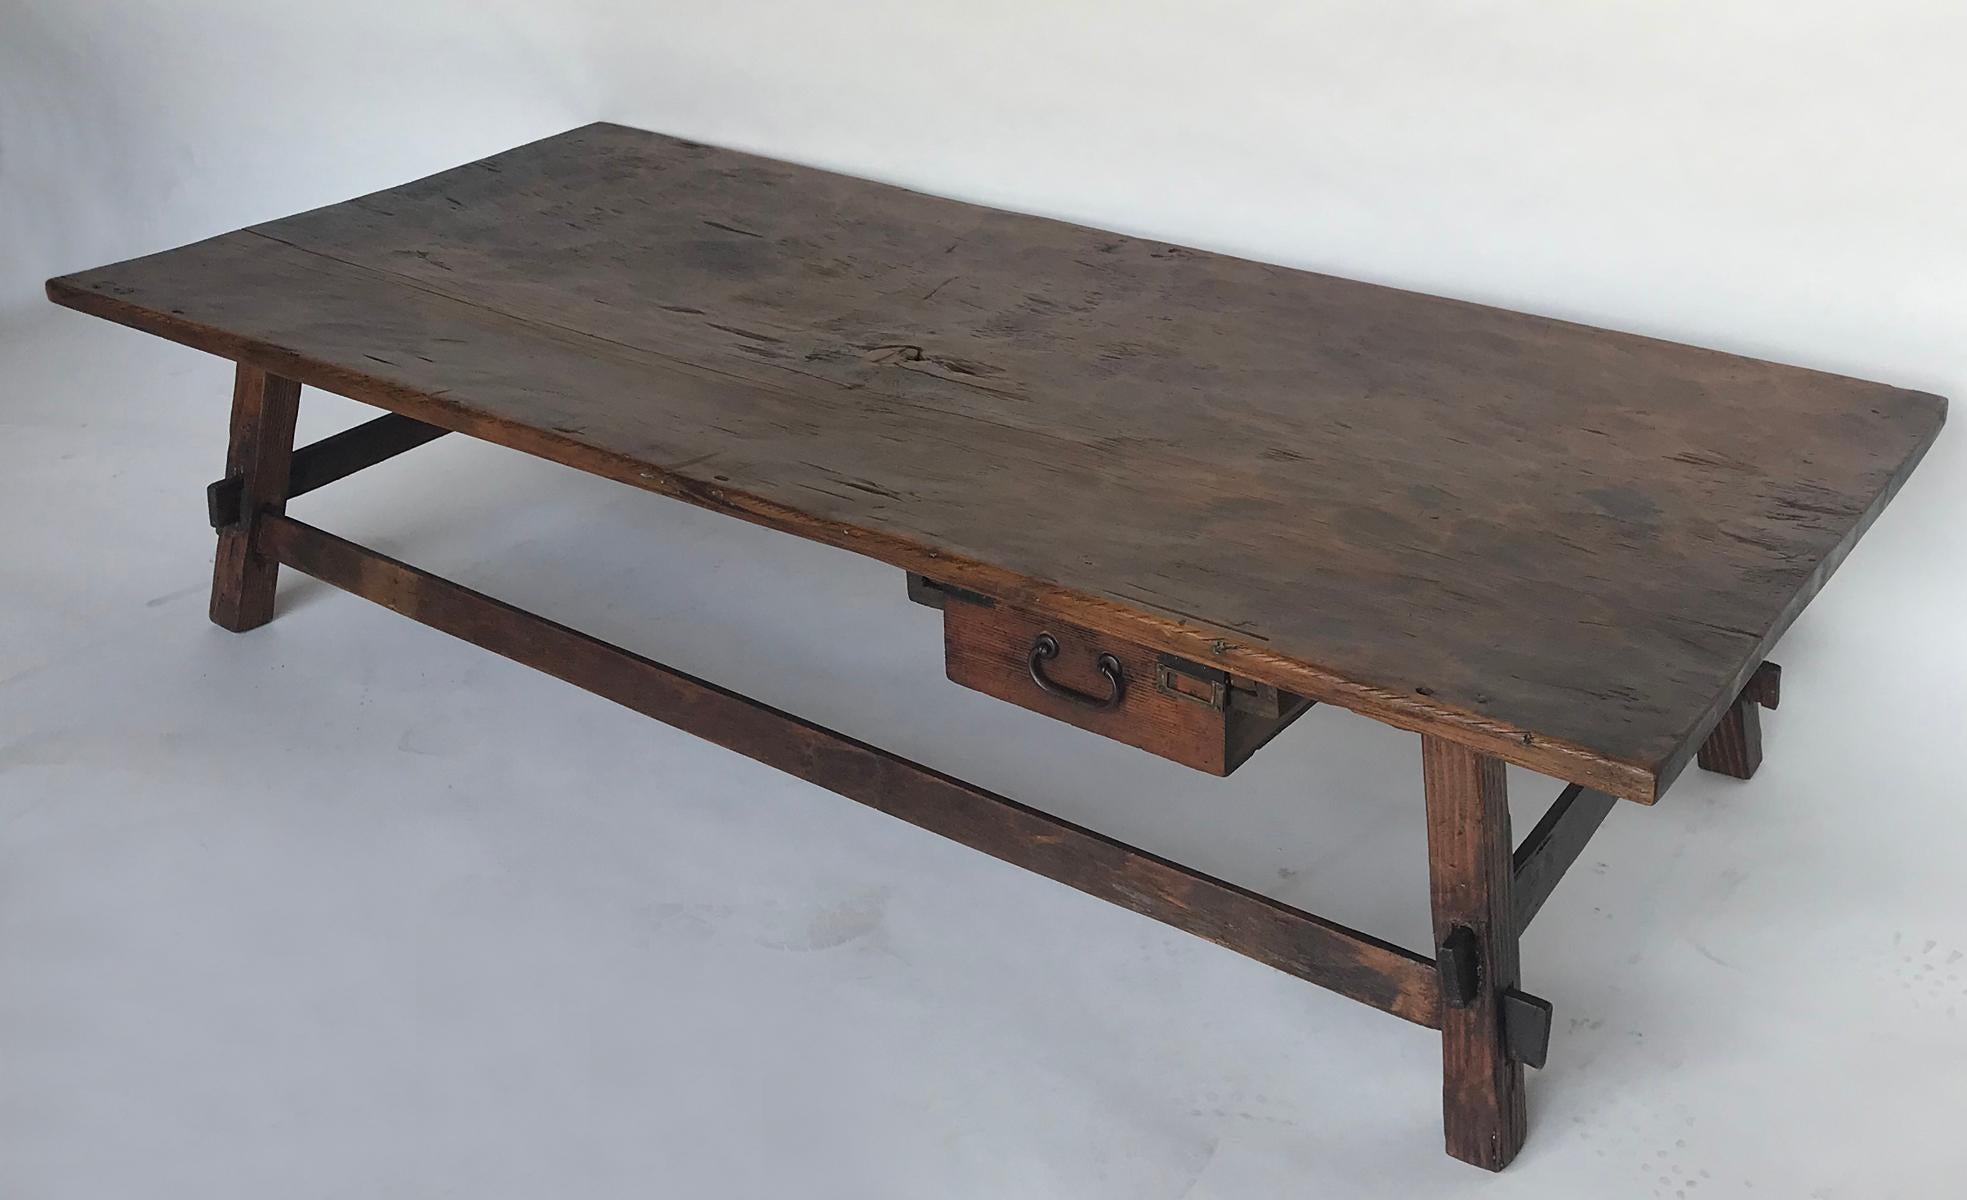 Guatemalan Rustic One Wide Board Coffee Table with Drawer